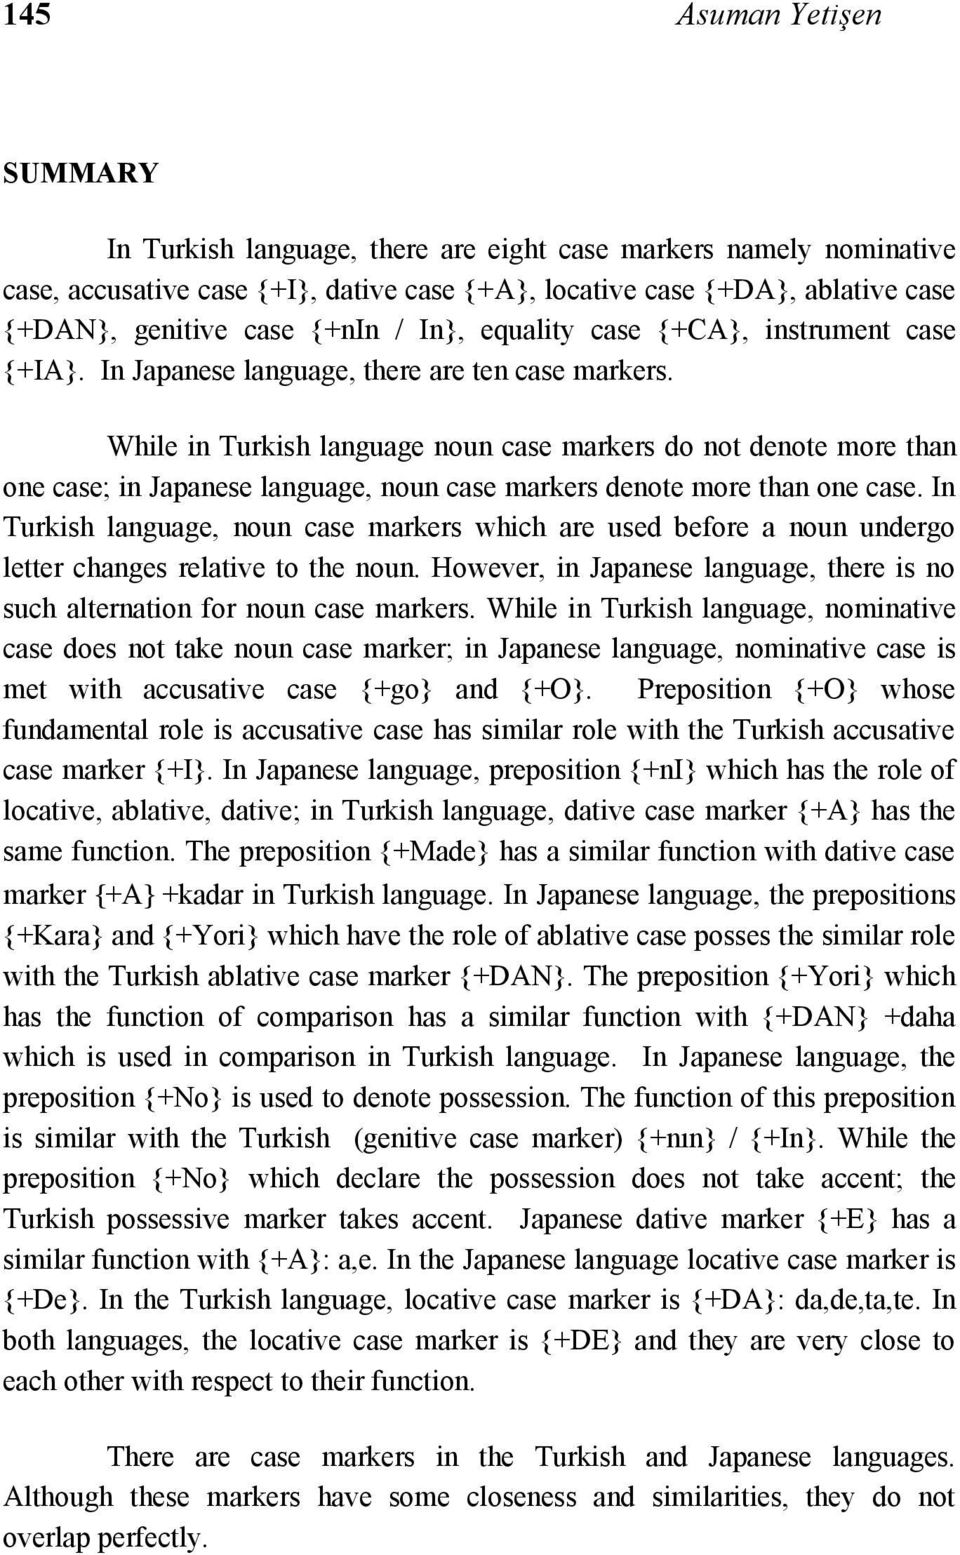 While in Turkish language noun case markers do not denote more than one case; in Japanese language, noun case markers denote more than one case.